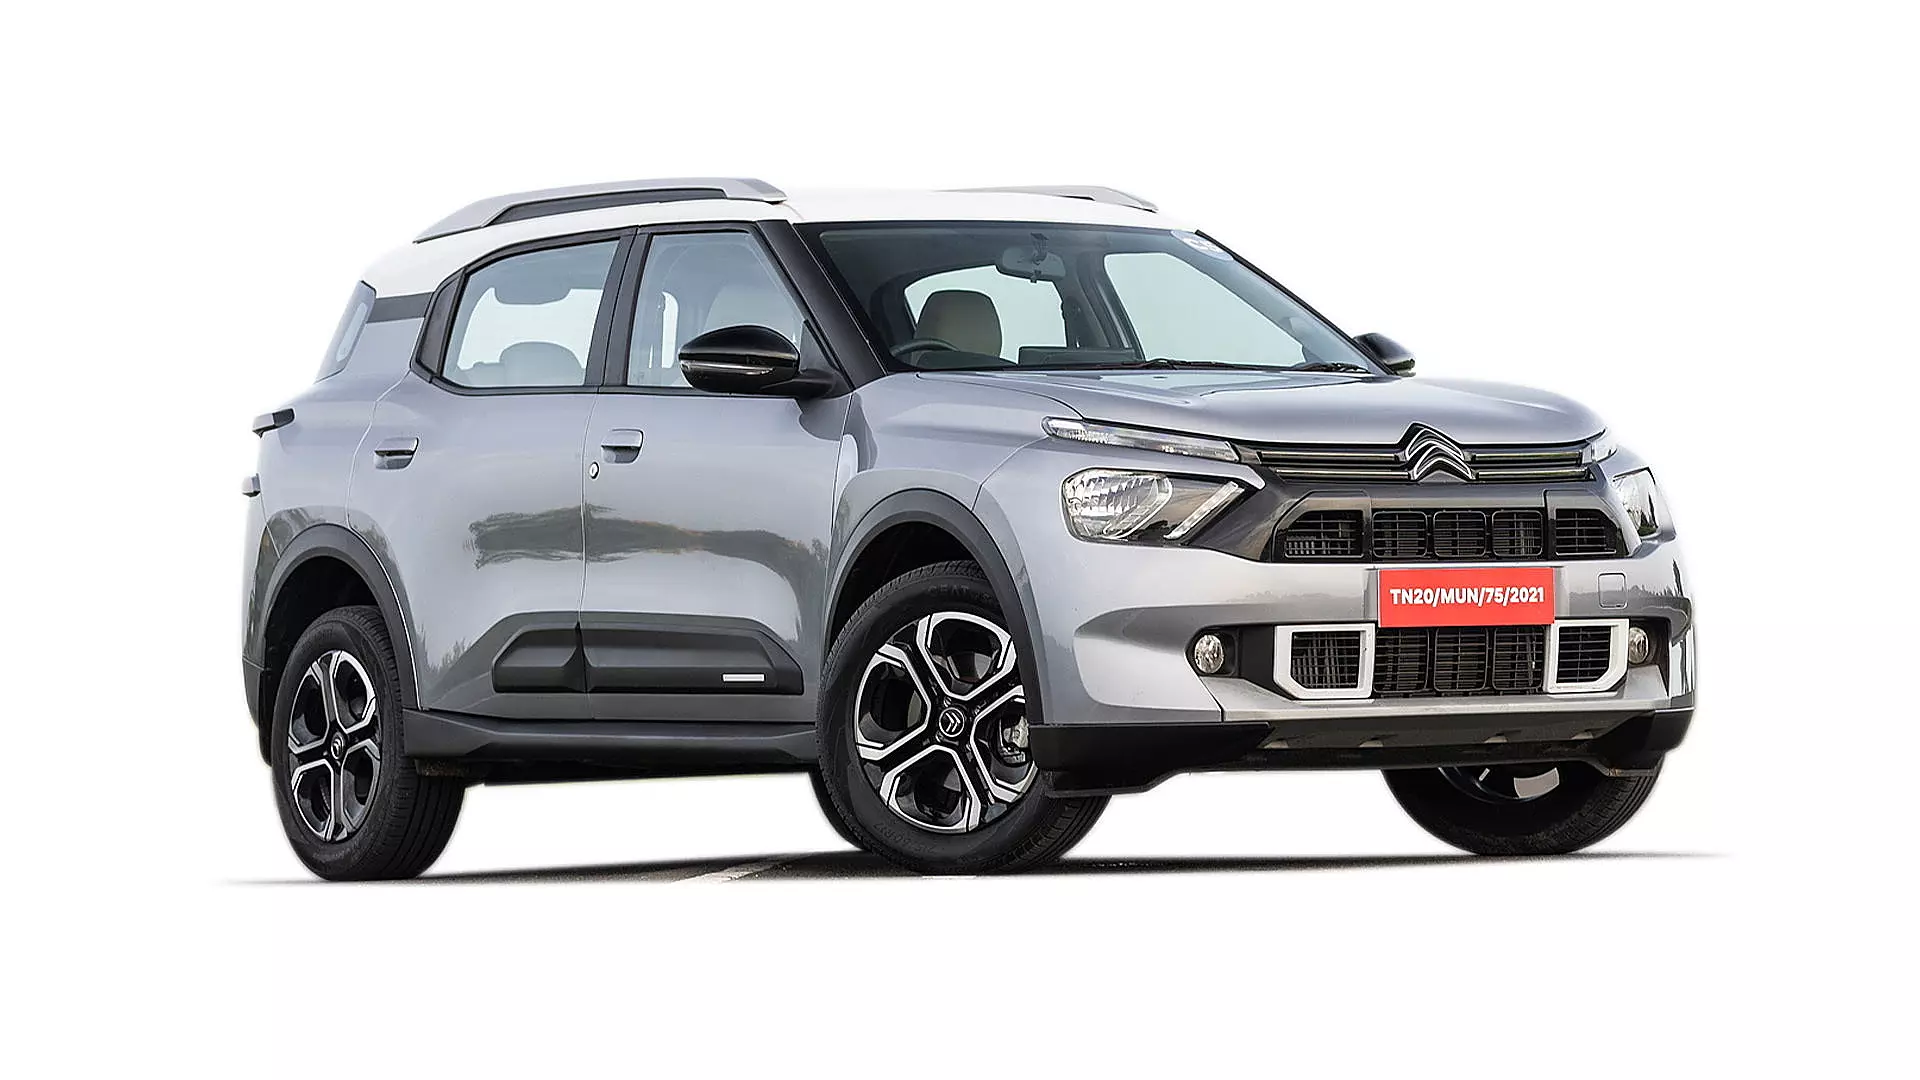 Citroën Increases Prices of C3  C3 Aircross  and eC3 Models in India